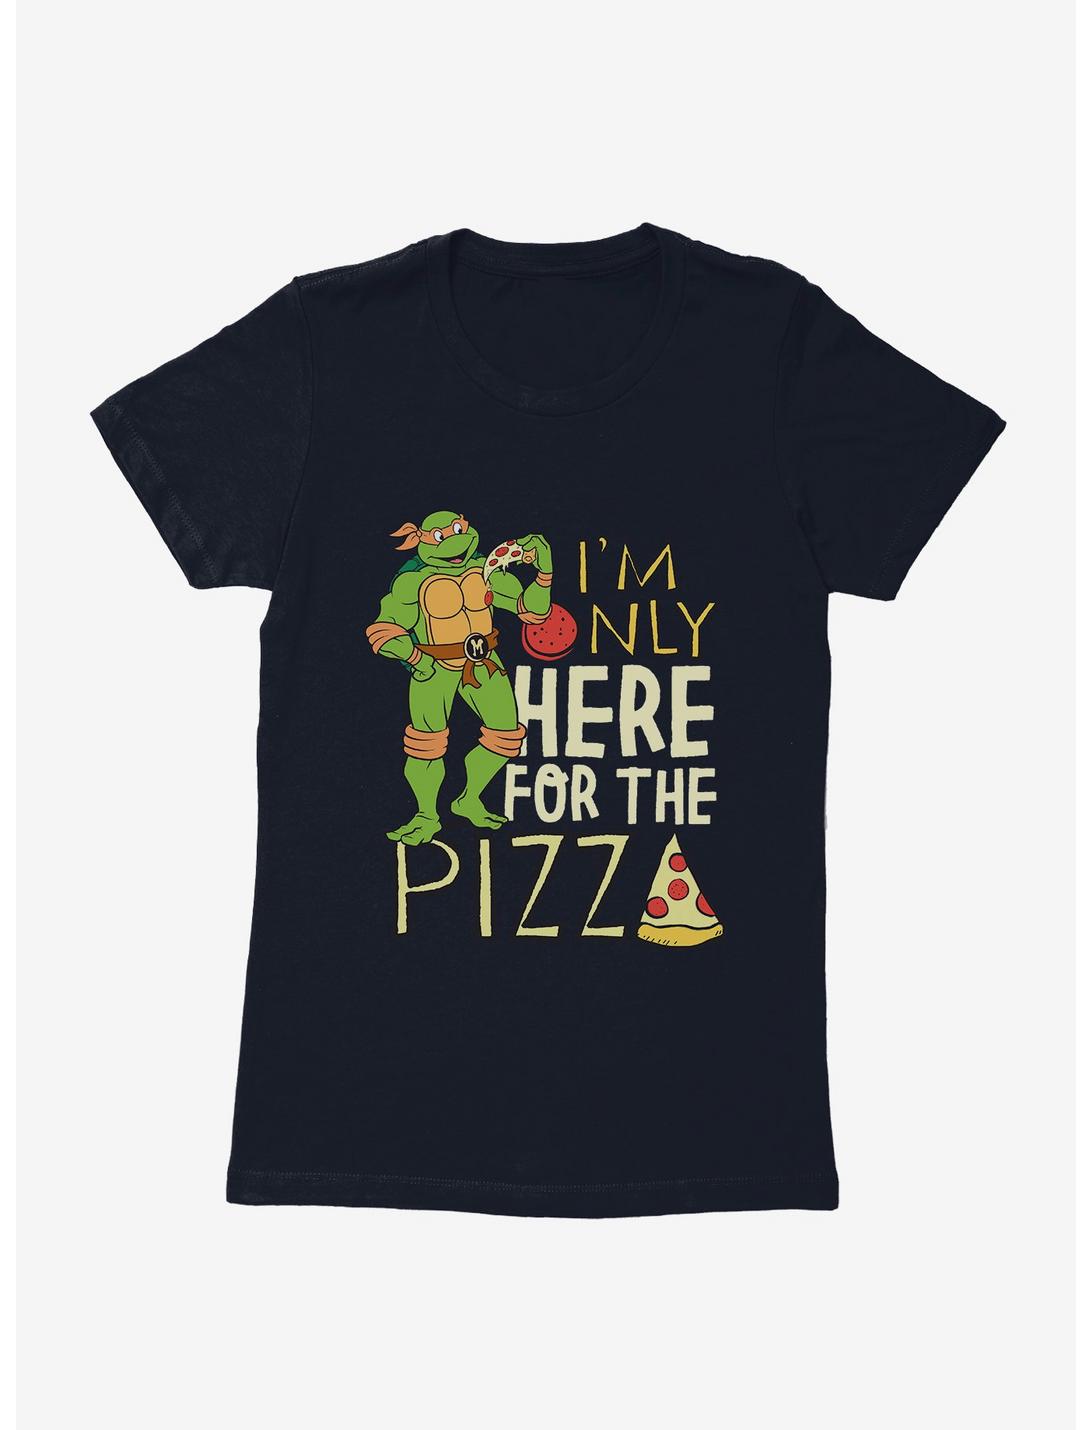 Teenage Mutant Ninja Turtles Michelangelo Only Here For Pizza Womens T-Shirt, MIDNIGHT NAVY, hi-res